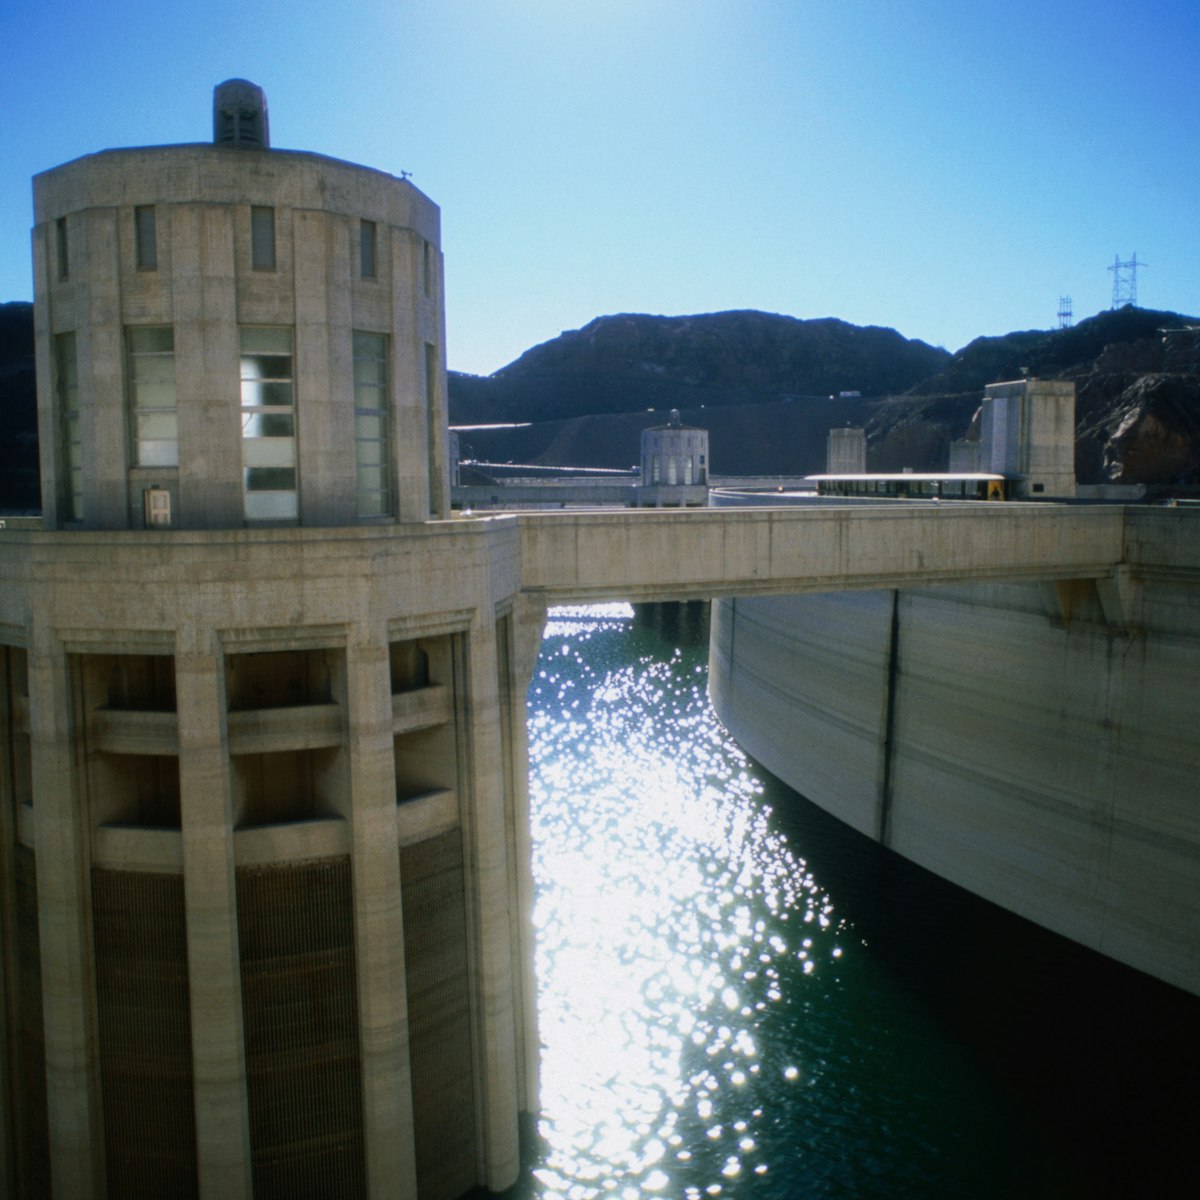 Hoover Dam.
16133-95
Las Vegas, Nevada, North America, United States, architecture, concrete, dam, energy industry, industry, power, structure, wall, water